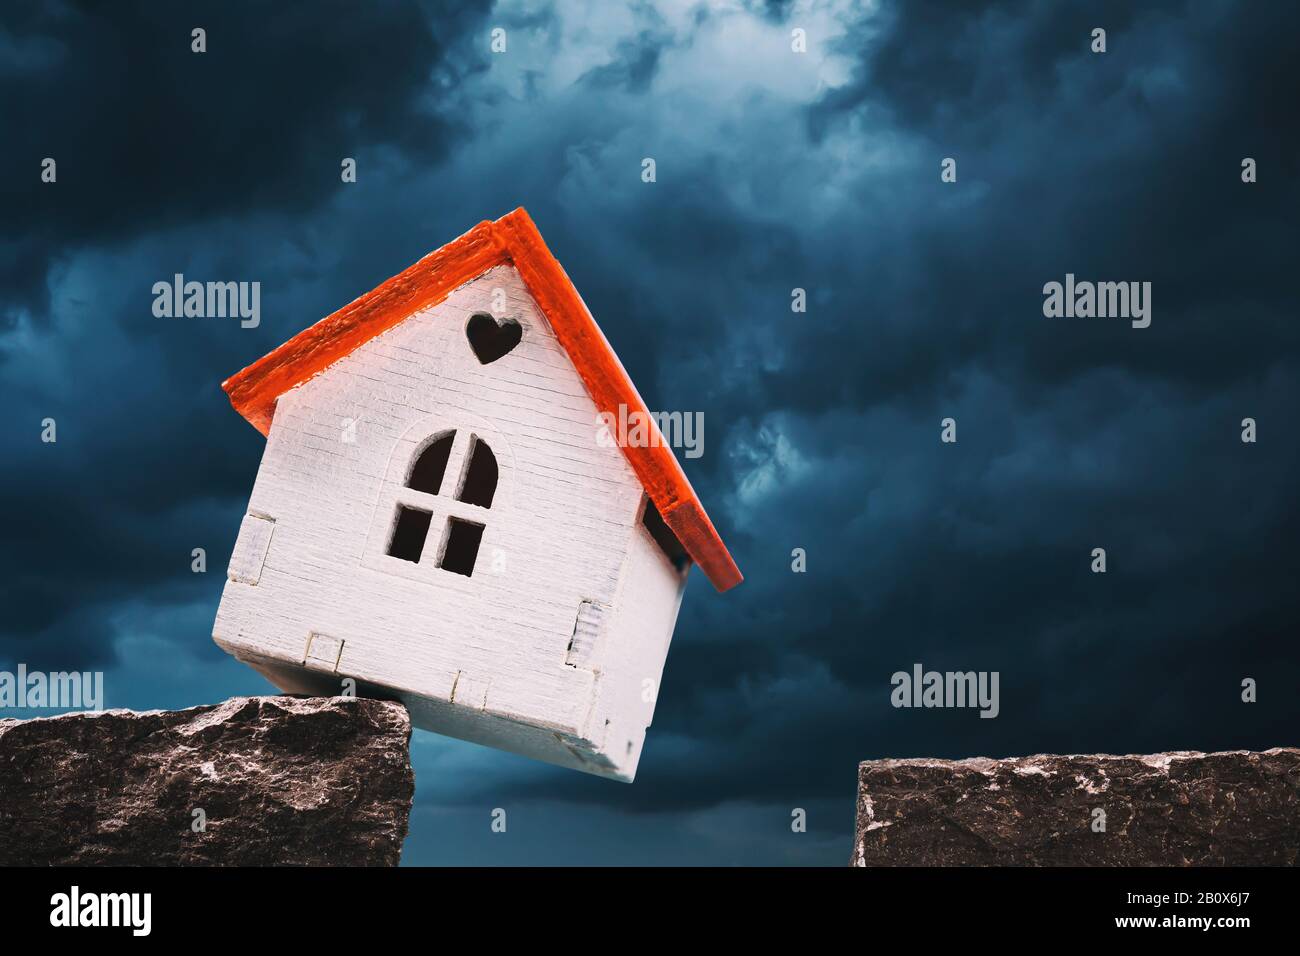 A toy house on a cliff of rock amid a grim sky. Concept on outstanding debt for mortgage lending Stock Photo